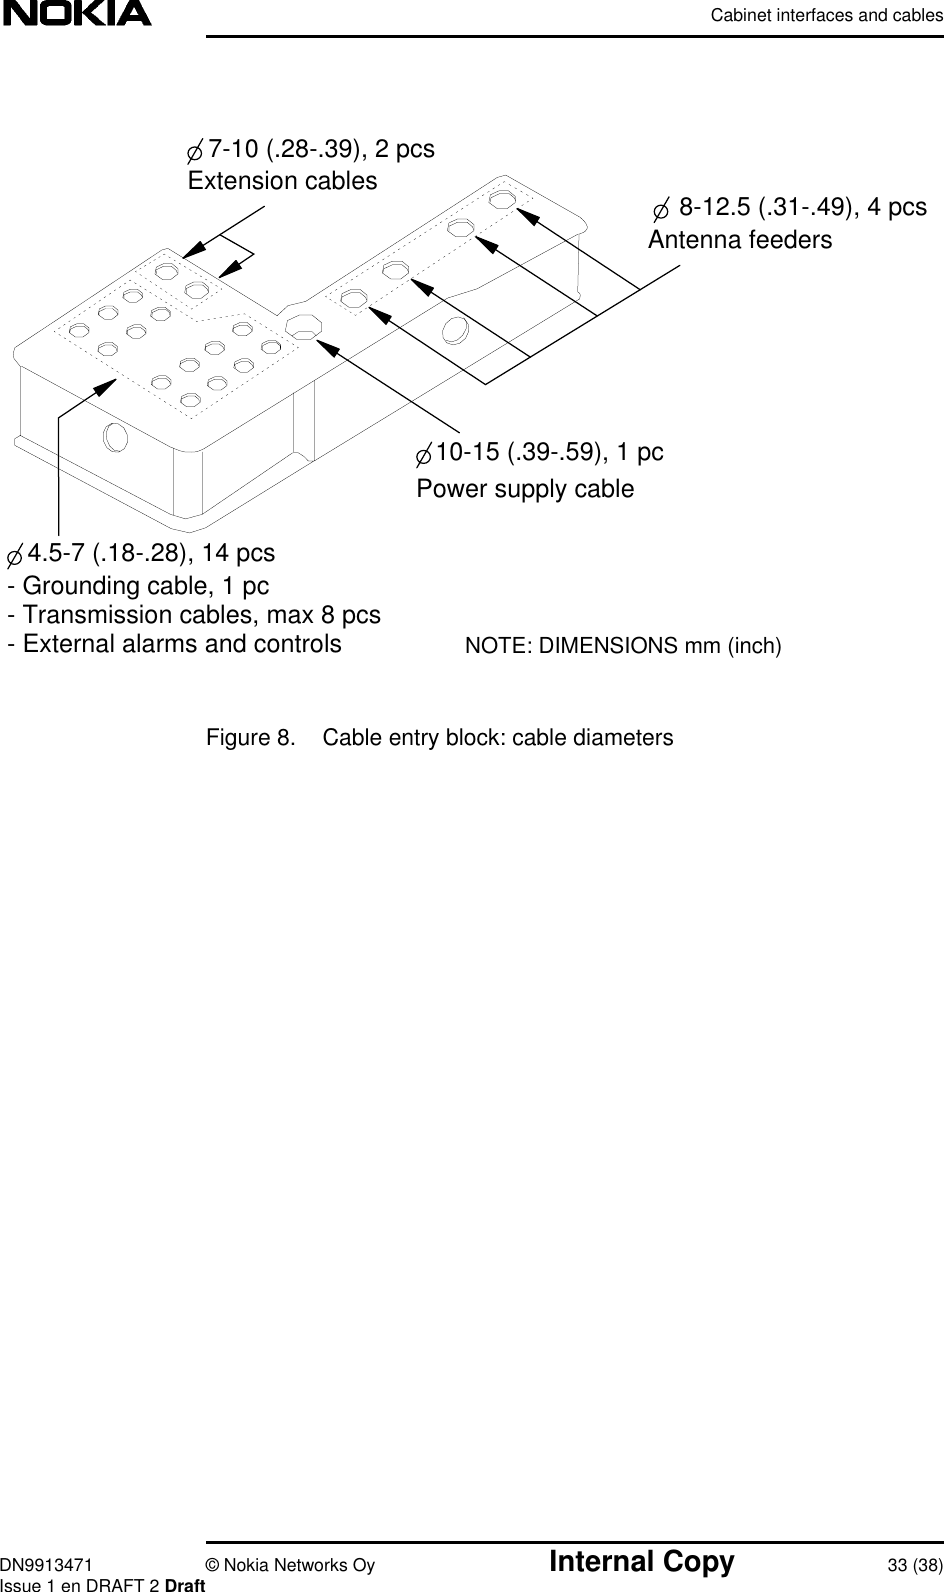 Cabinet interfaces and cablesDN9913471 © Nokia Networks Oy Internal Copy 33 (38)Issue 1 en DRAFT 2 DraftFigure 8. Cable entry block: cable diameters 4.5-7 (.18-.28), 14 pcs 7-10 (.28-.39), 2 pcs10-15 (.39-.59), 1 pcNOTE: DIMENSIONS mm (inch)Extension cablesPower supply cableAntenna feeders- Grounding cable, 1 pc- Transmission cables, max 8 pcs- External alarms and controls 8-12.5 (.31-.49), 4 pcs